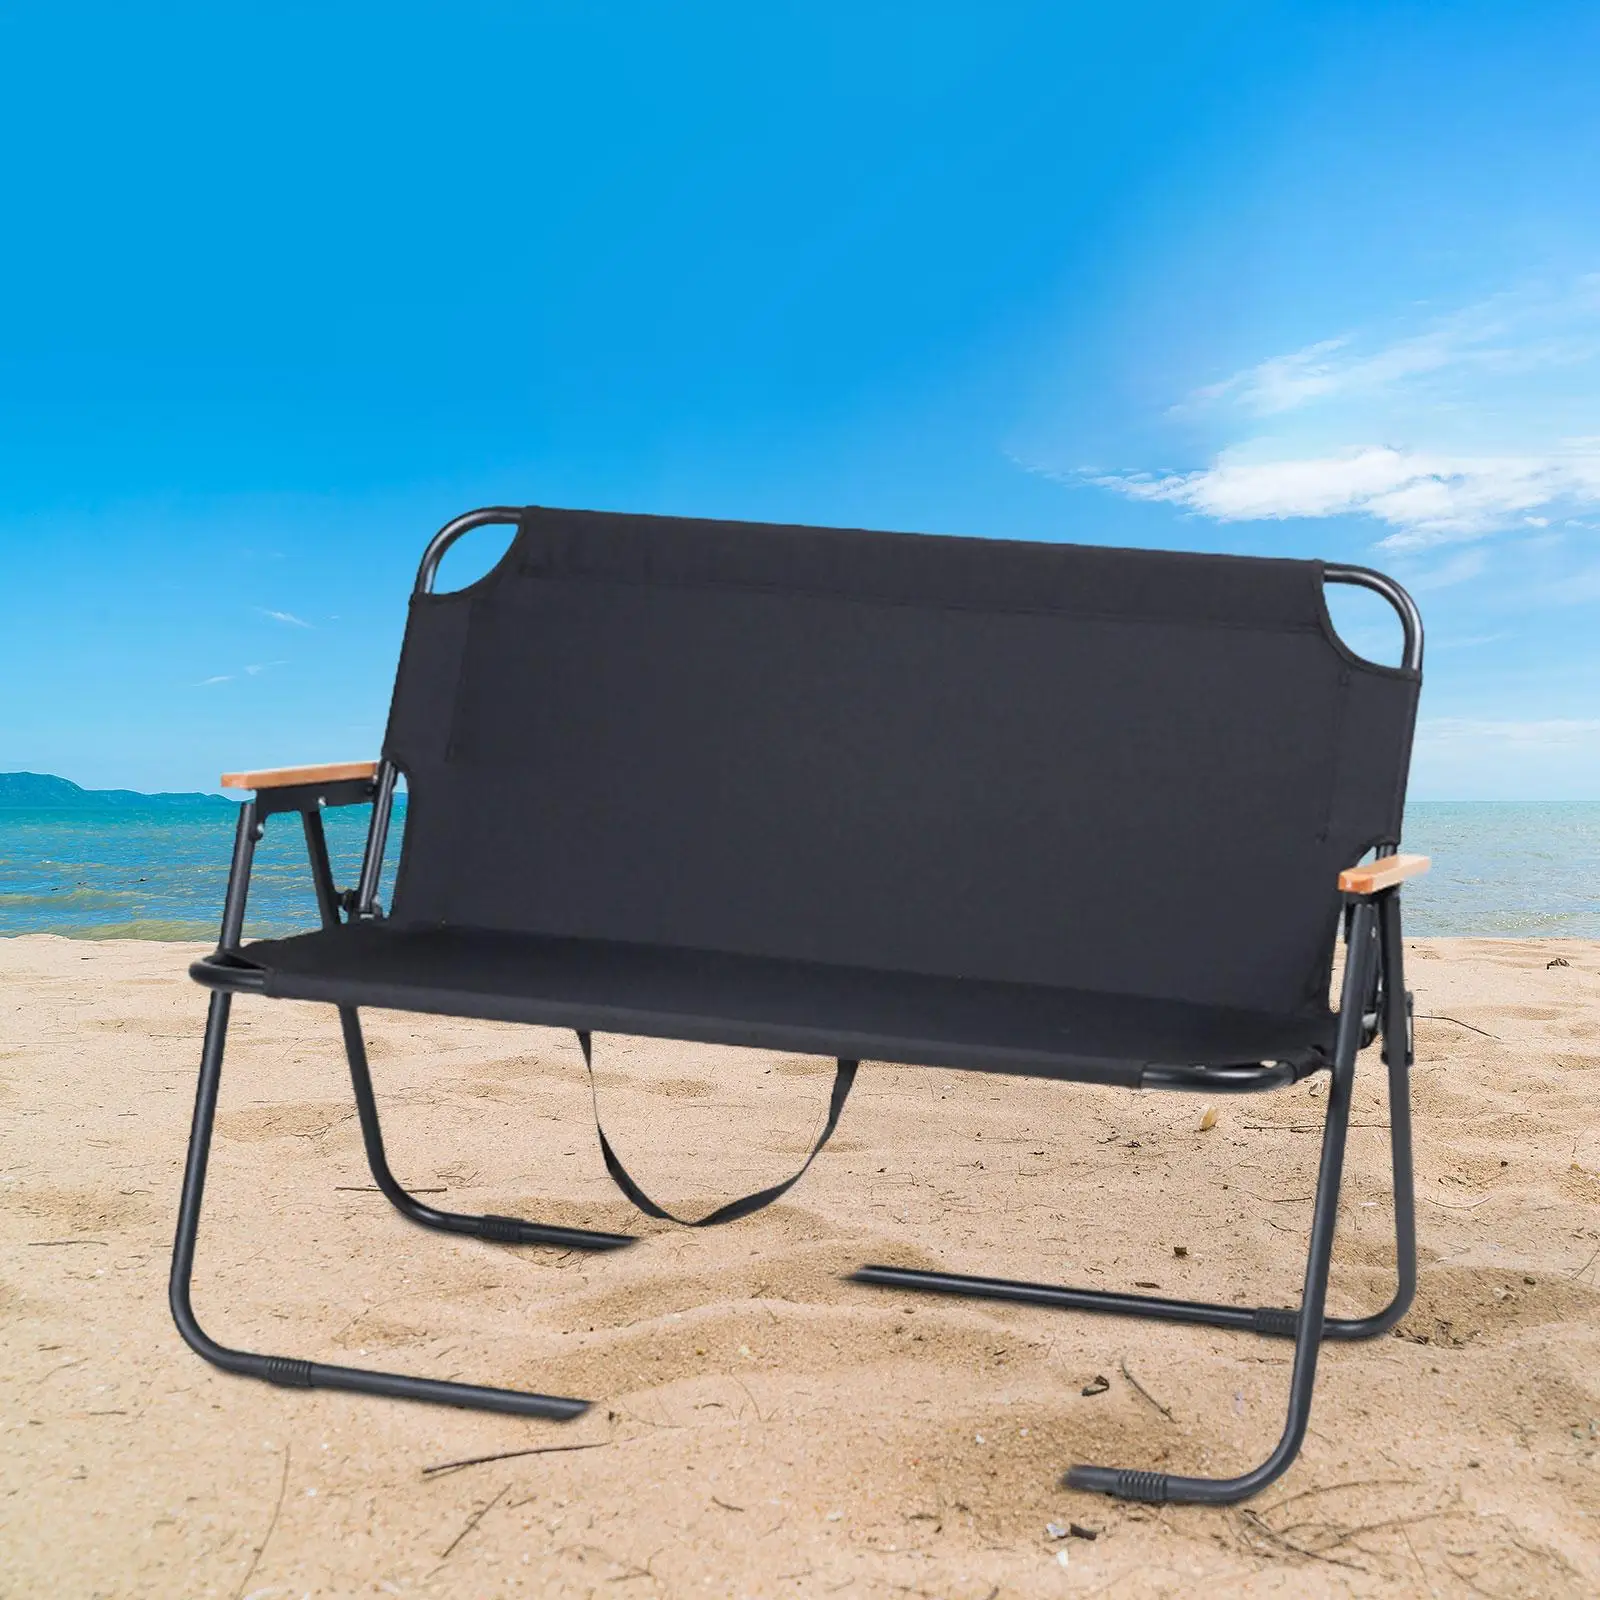 Folding Camping Chair Camping Stool Chair Adult Patio Outdoor Traveling Lightweight Double Chair Fishing Camp Chair Armchair